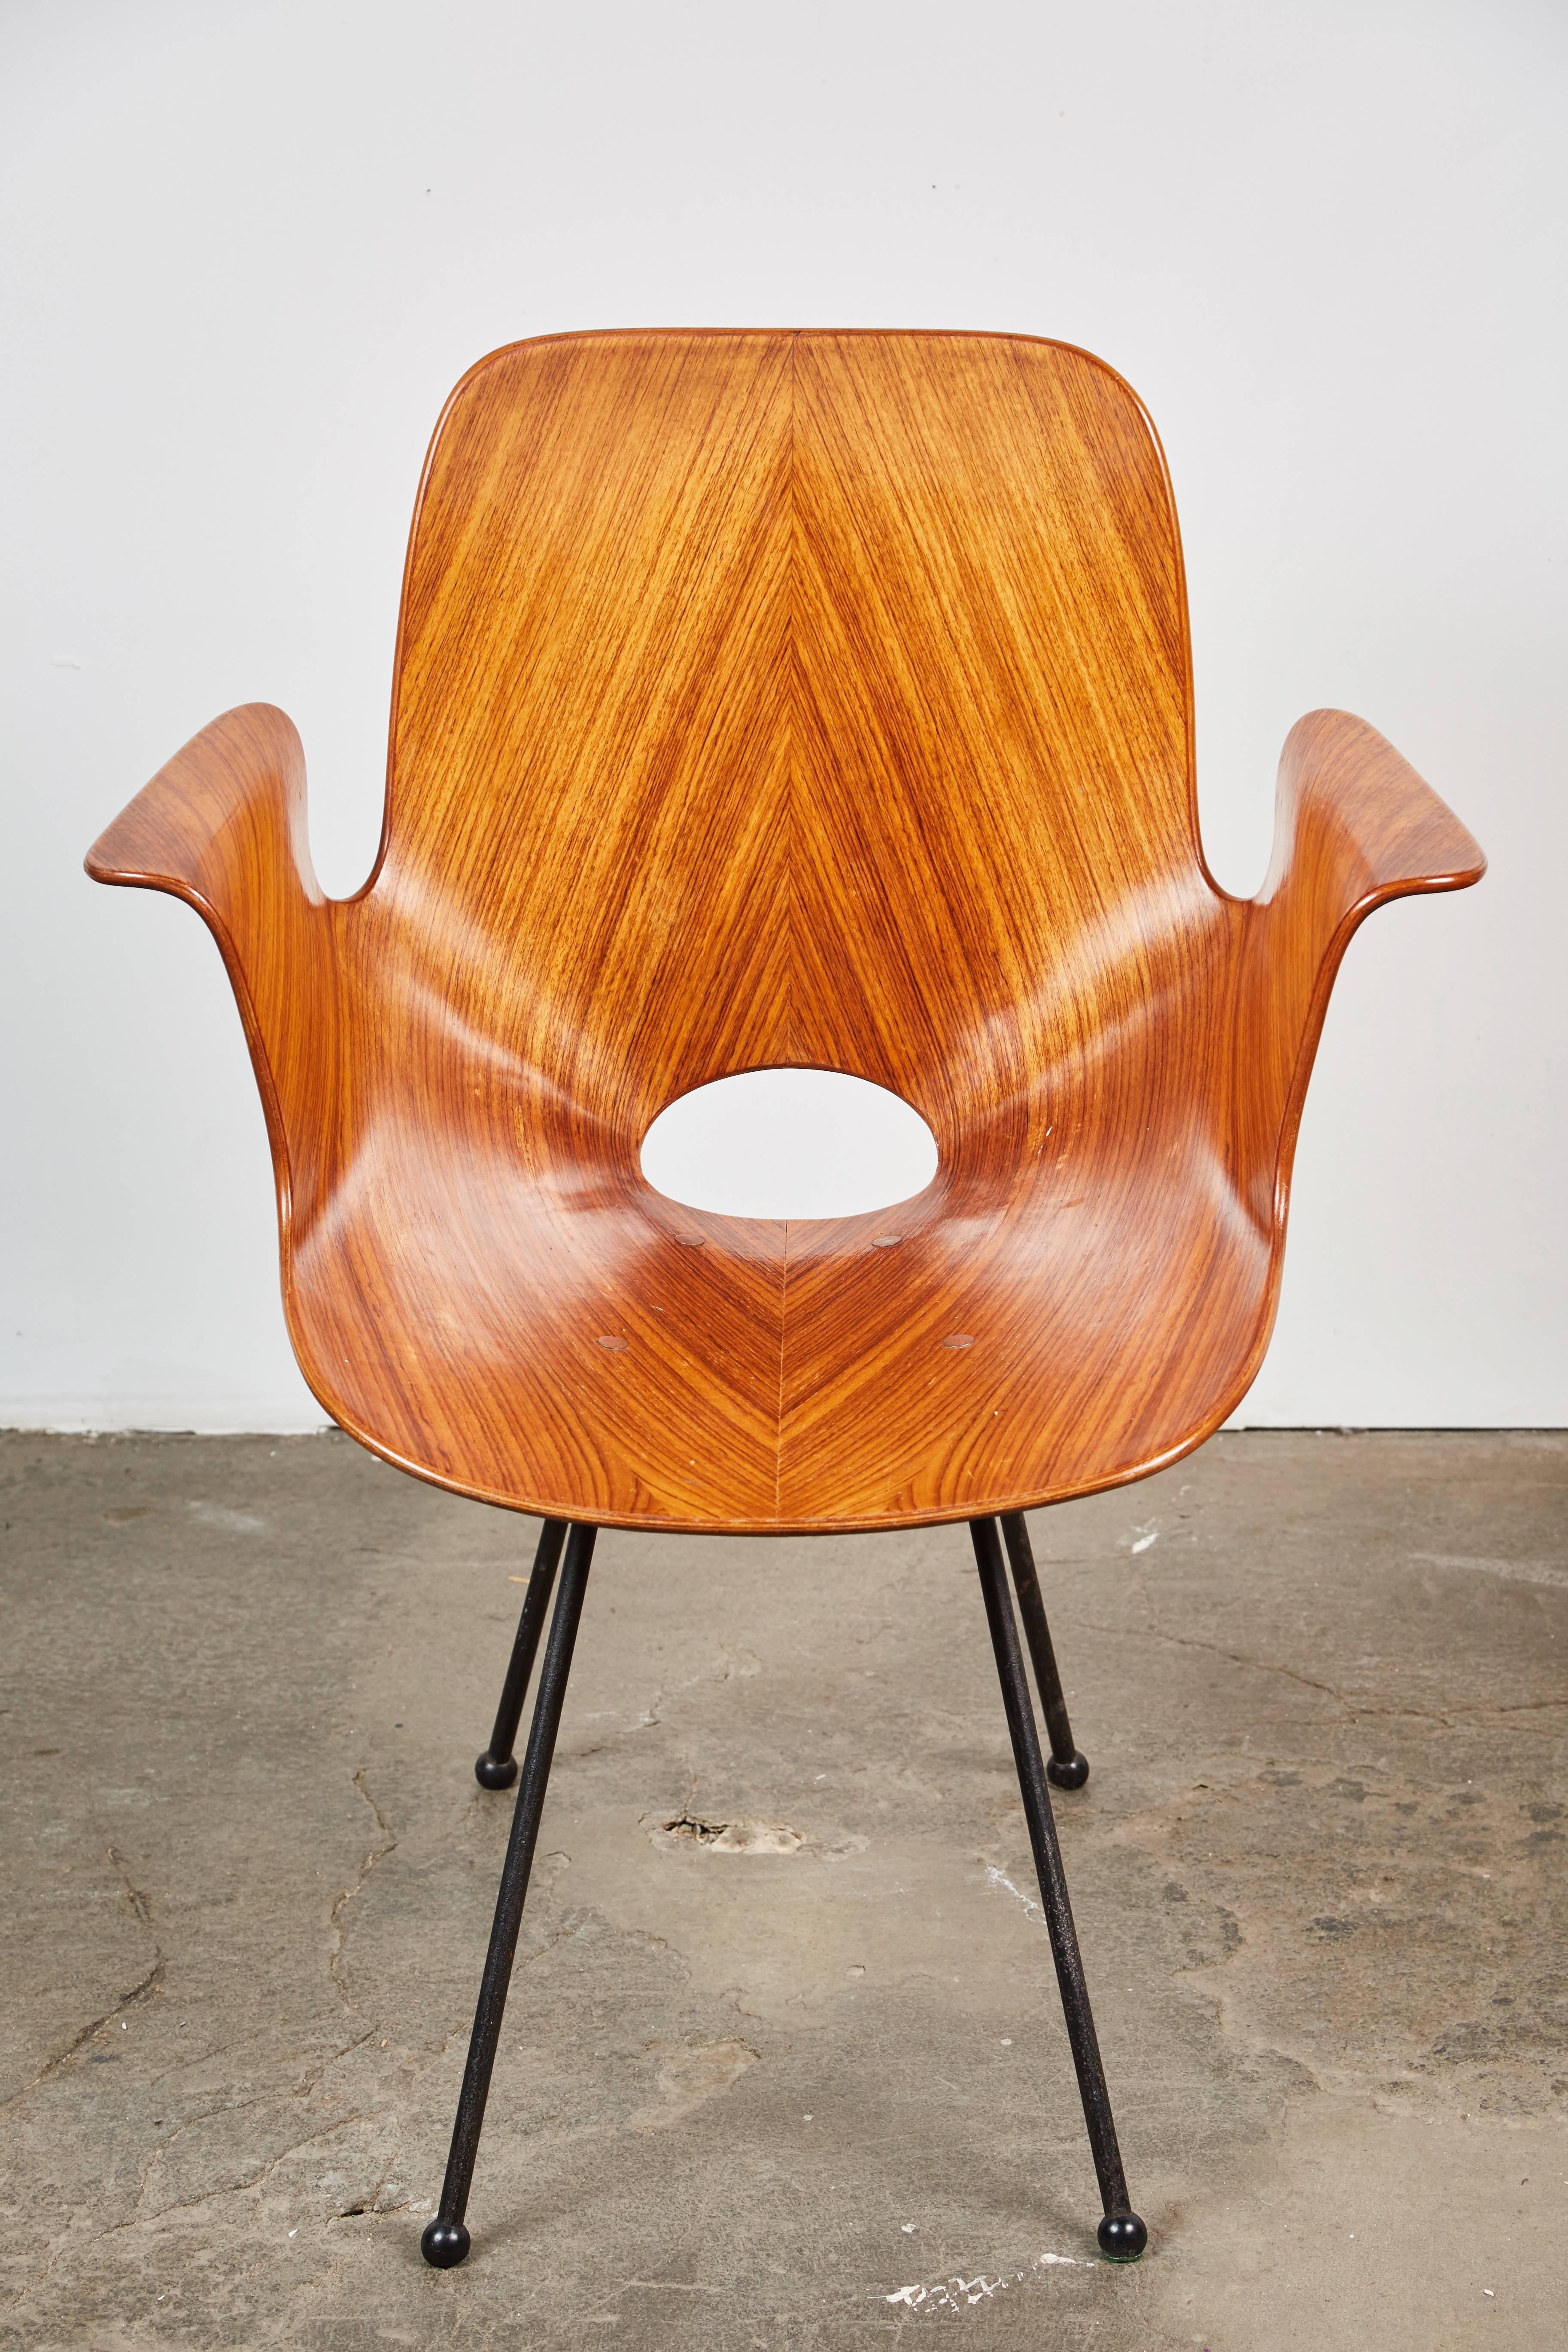 Mahogany bentwood Medea armchair by Vittorio Nobili for Fratelli Tagliabue. Made in Italy, circa 1956.

Second chair available with darker mahogany finish.